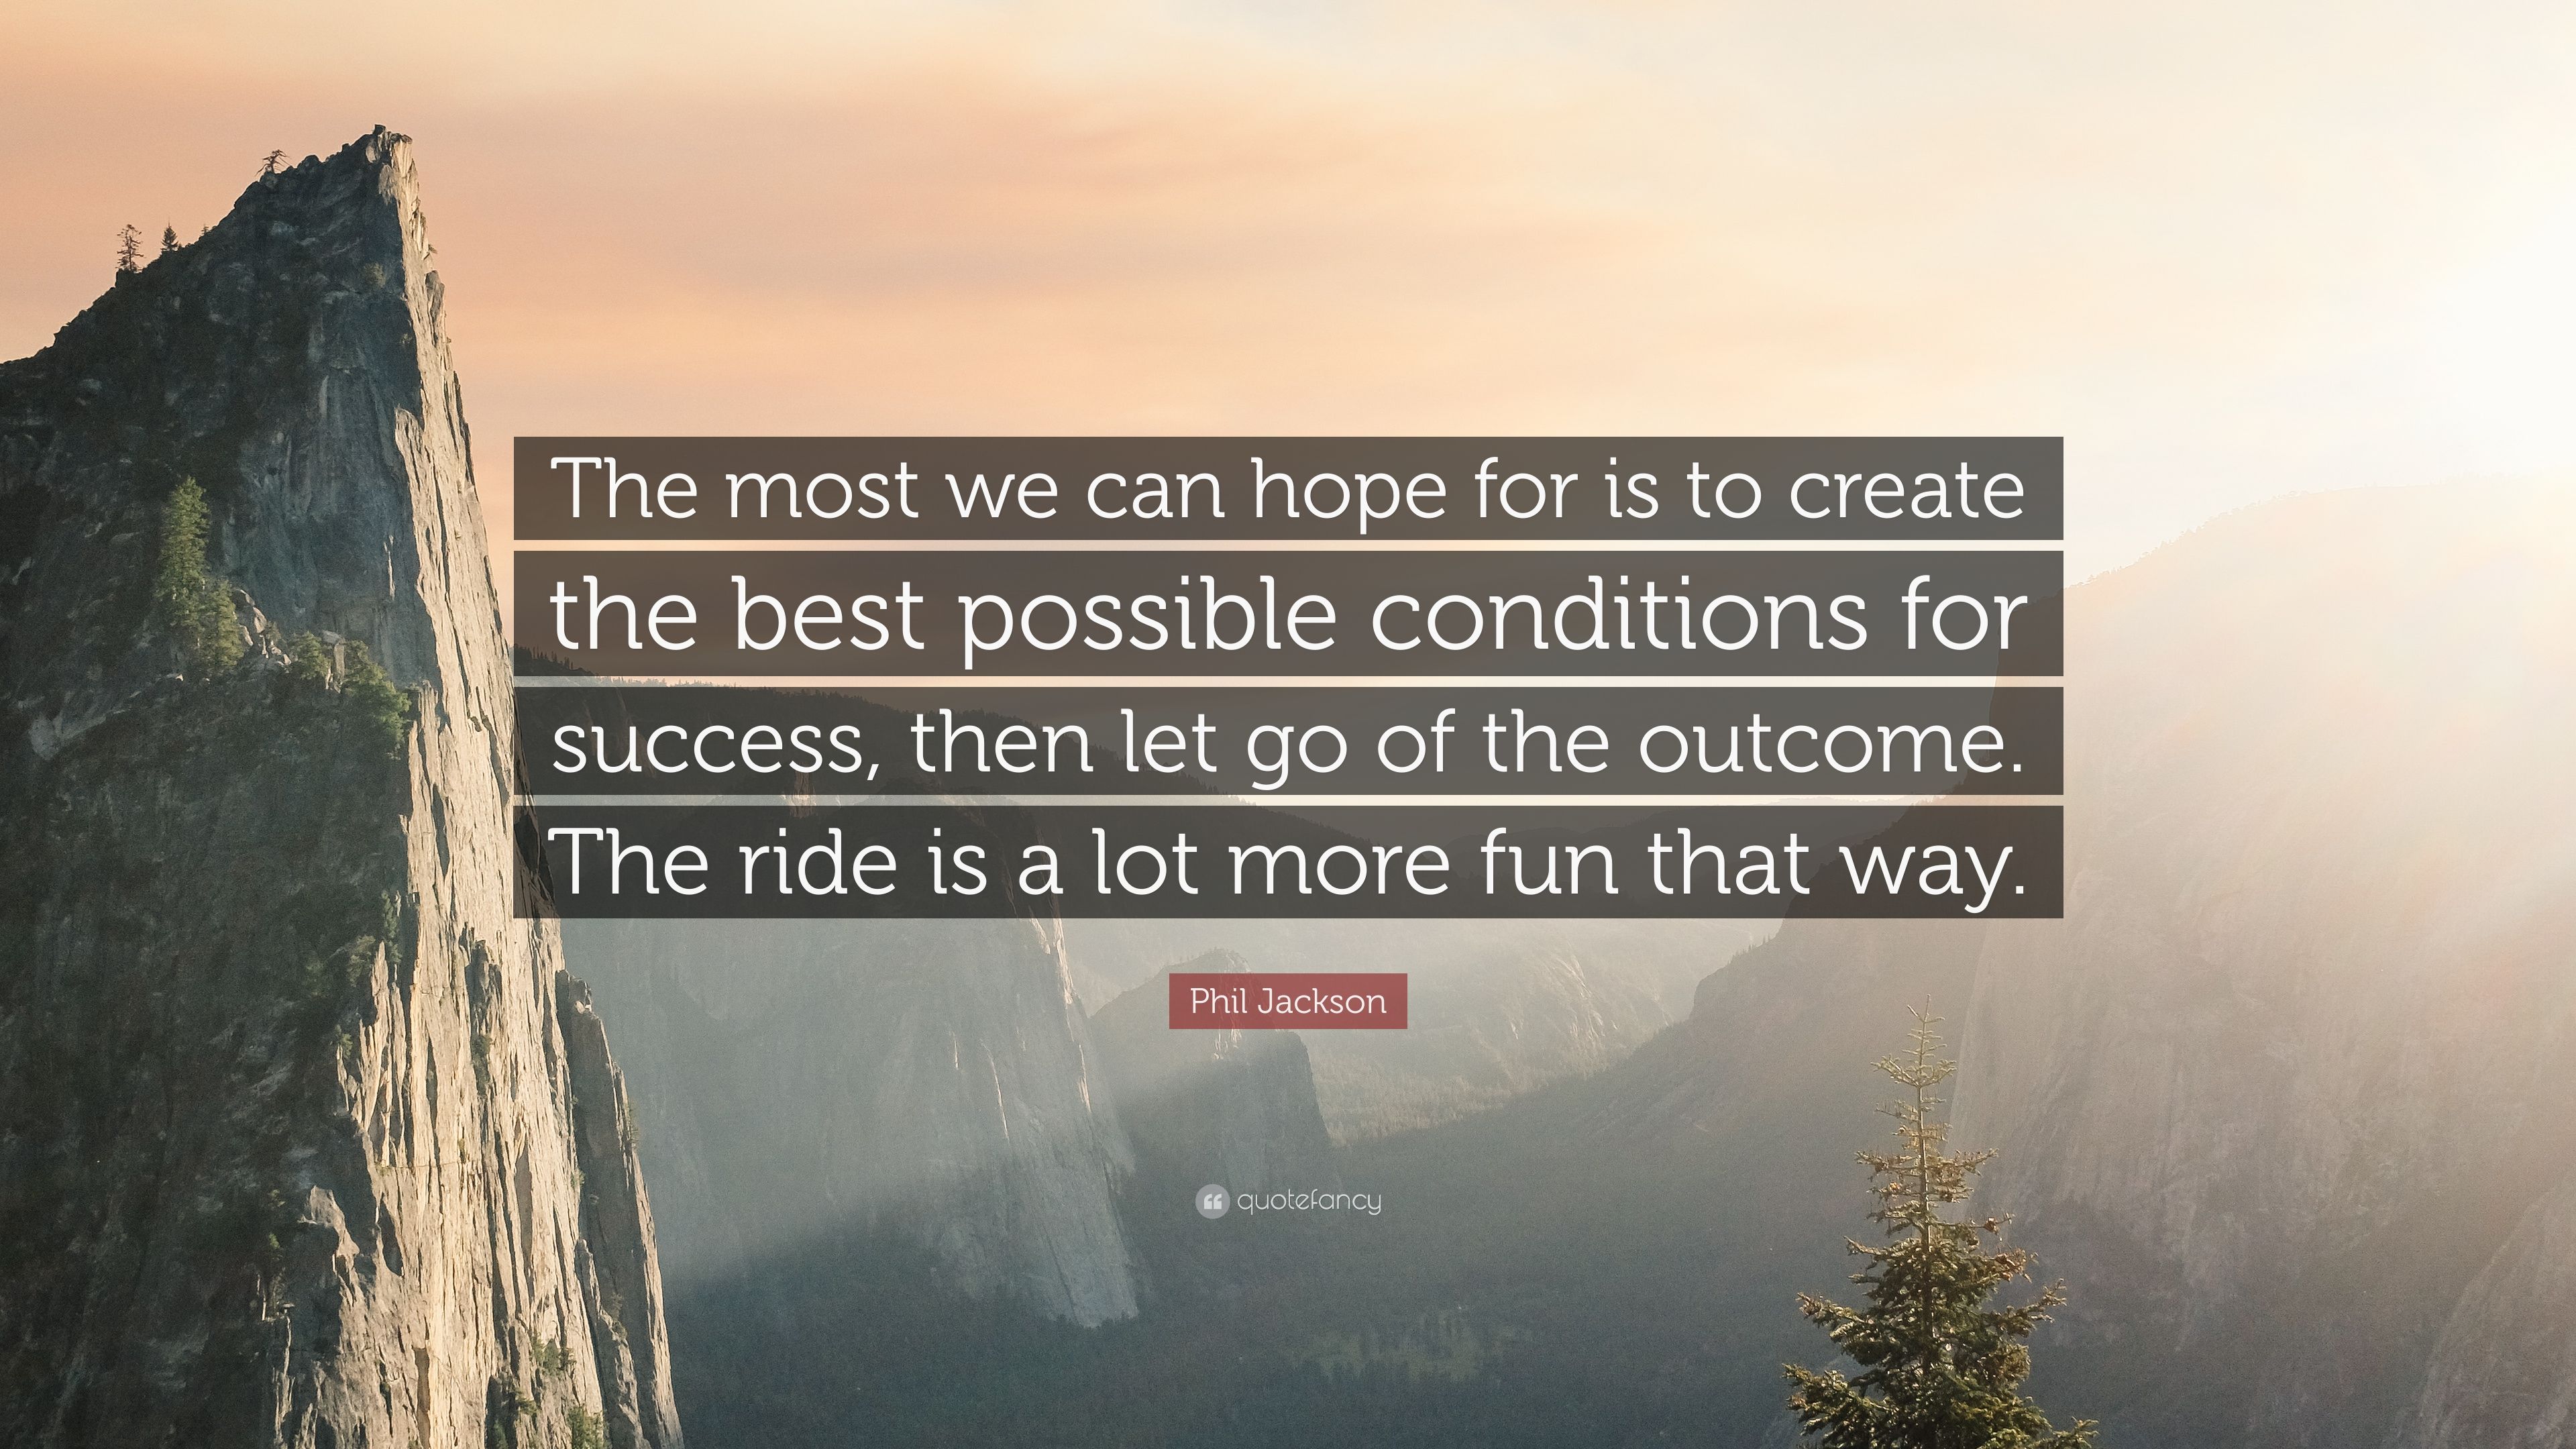 Phil Jackson Quote: “The most we can hope for is to create the best possible conditions for success, then let go of the outcome. The ride is .”